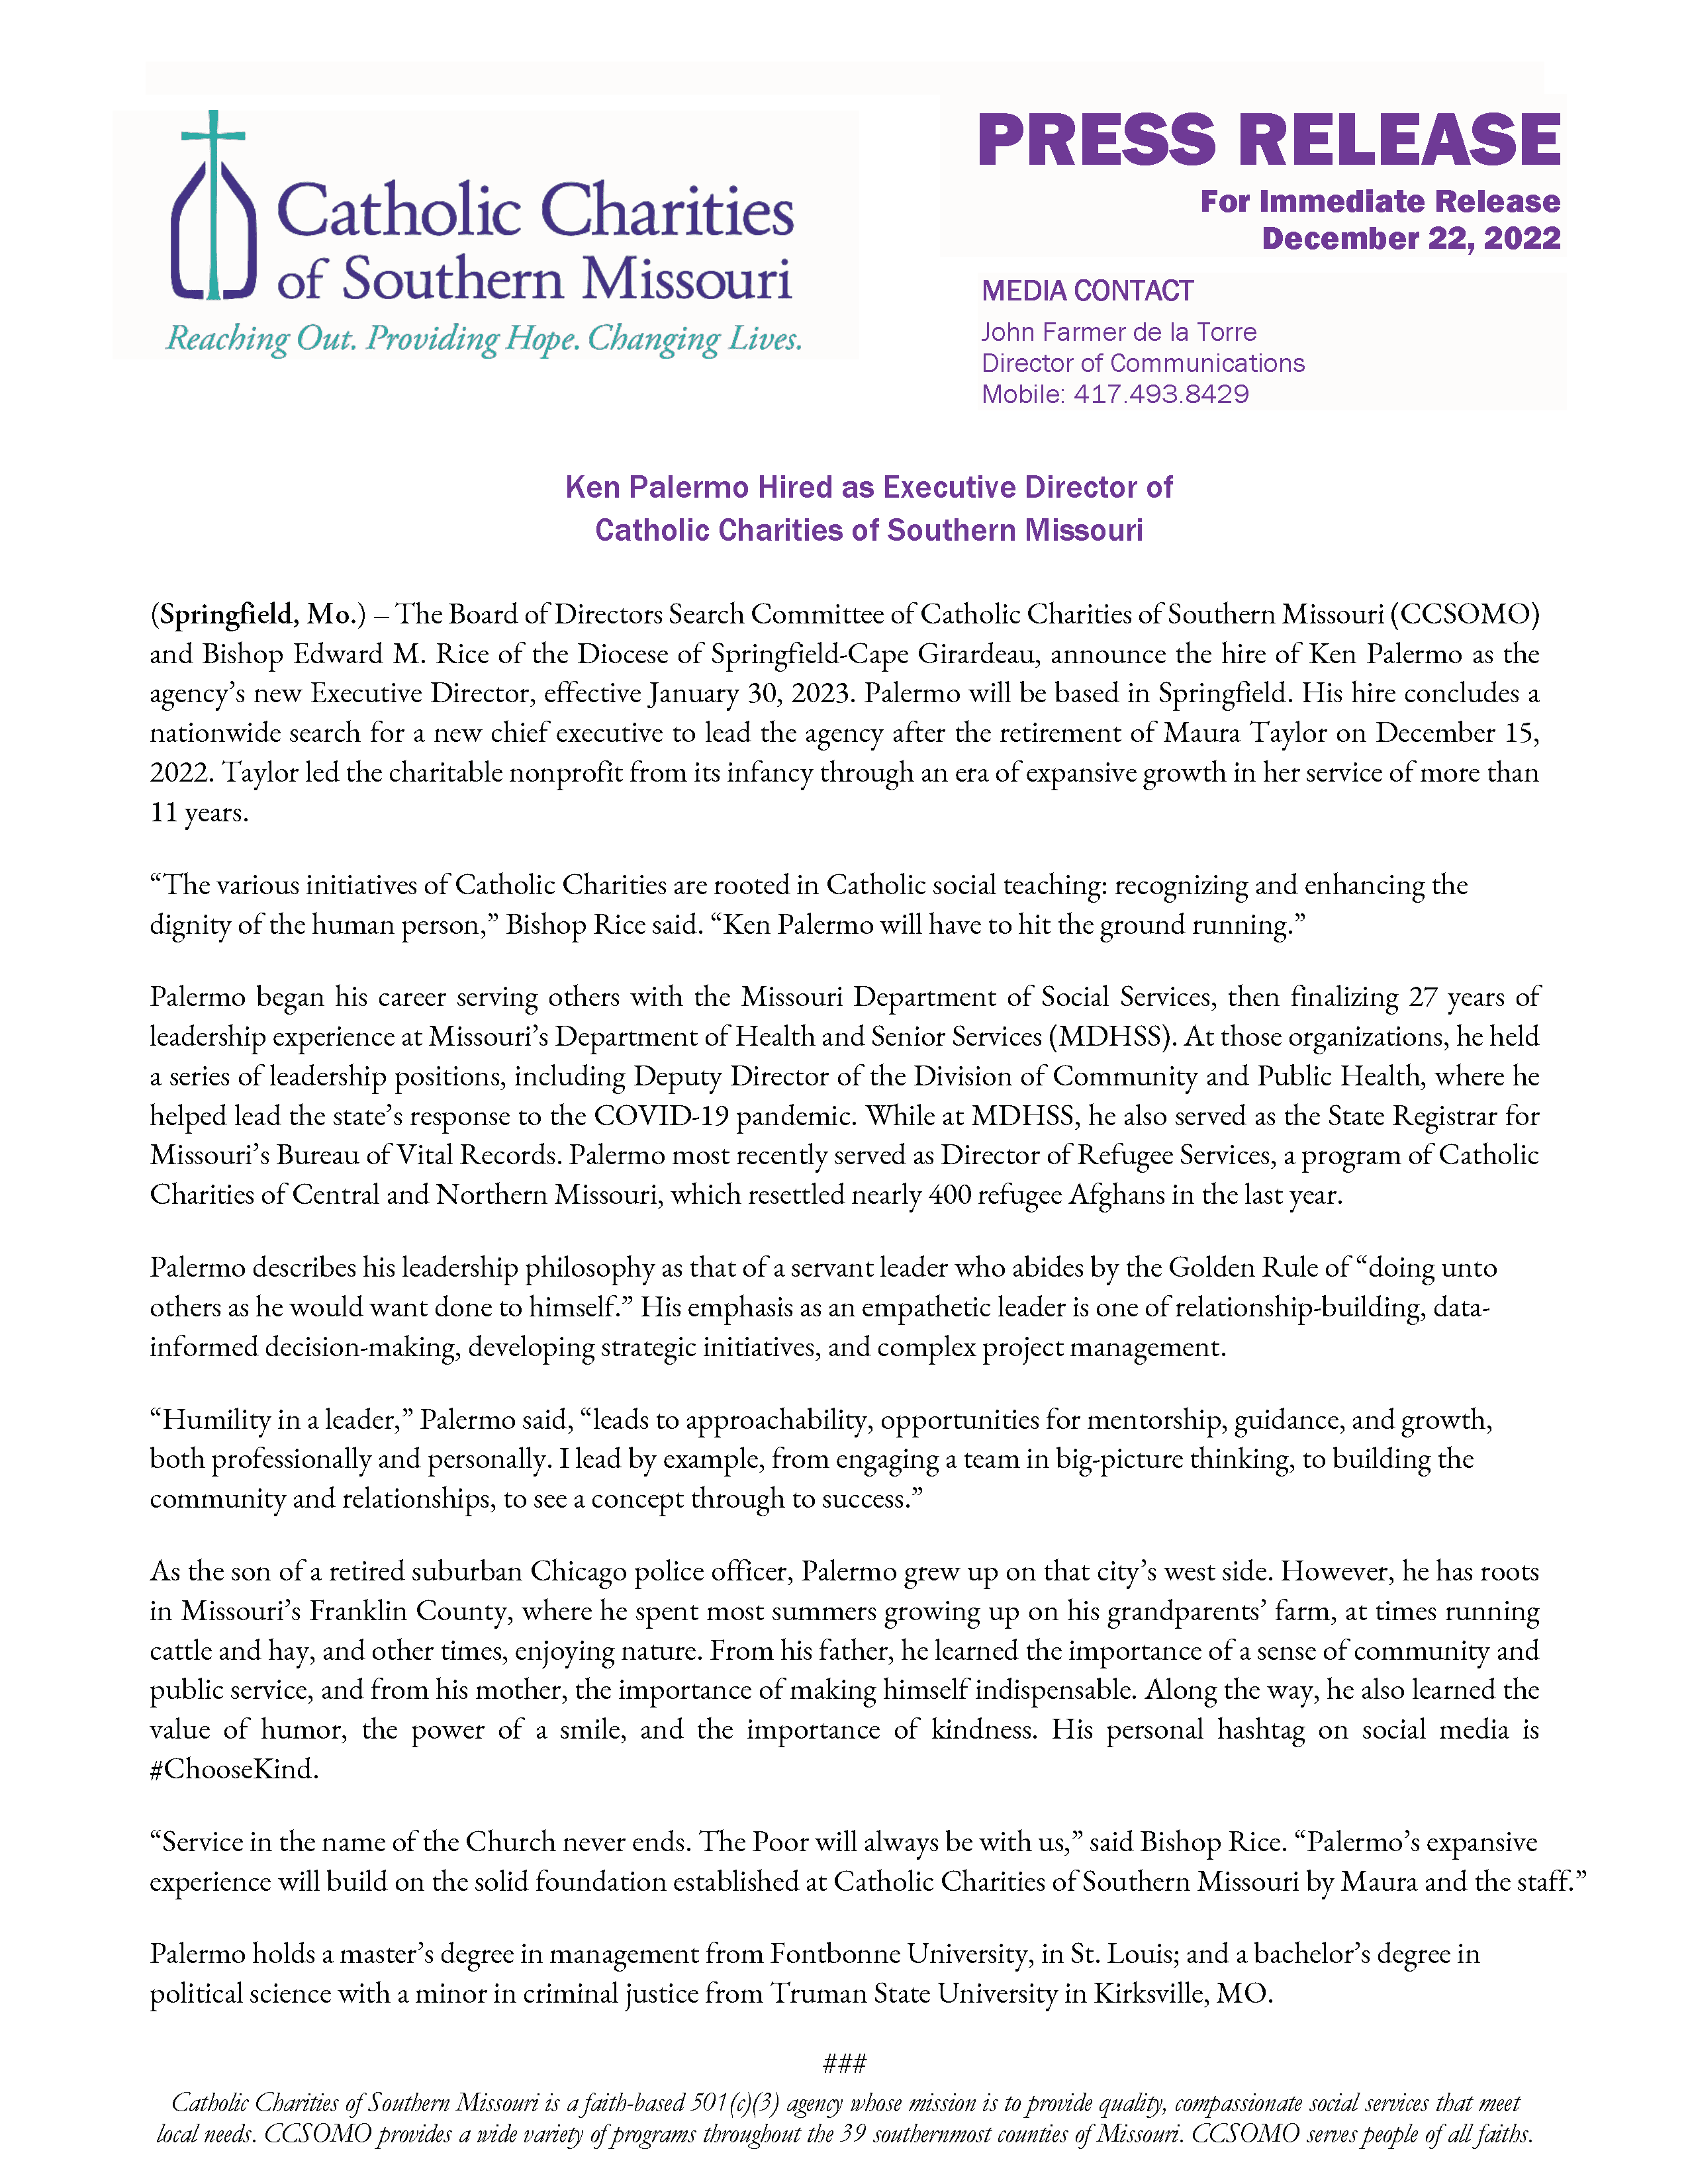 PRESS RELEASE - Ken Palermo named as new Executive Director of Catholic Charities of Southern Missouri.